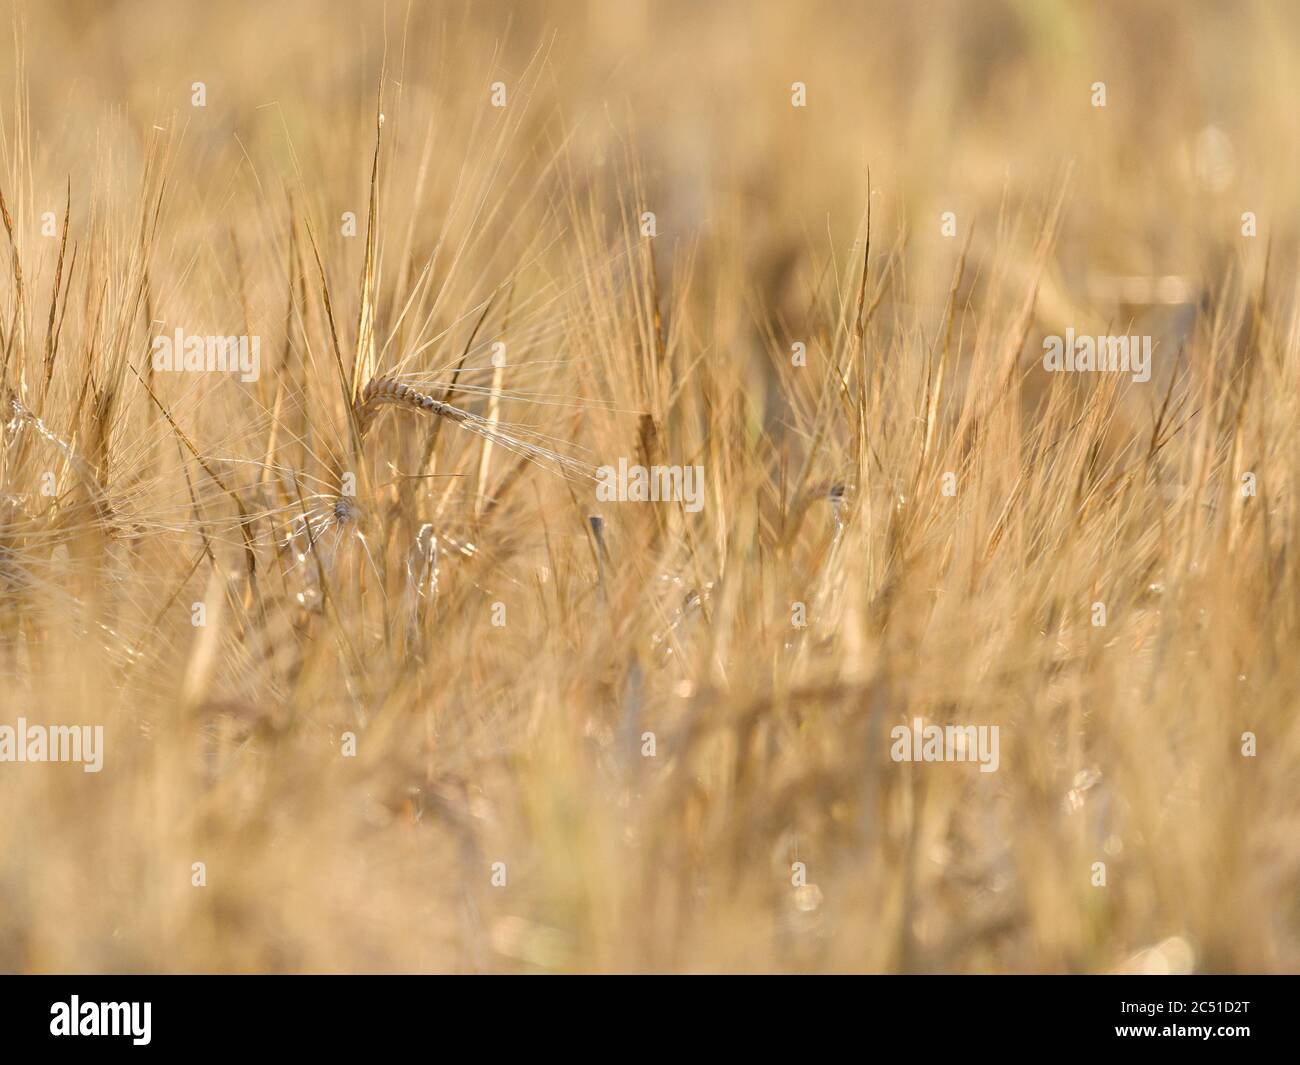 A field of ripening barley in golden sunlight with one spikelet standing out. Stock Photo